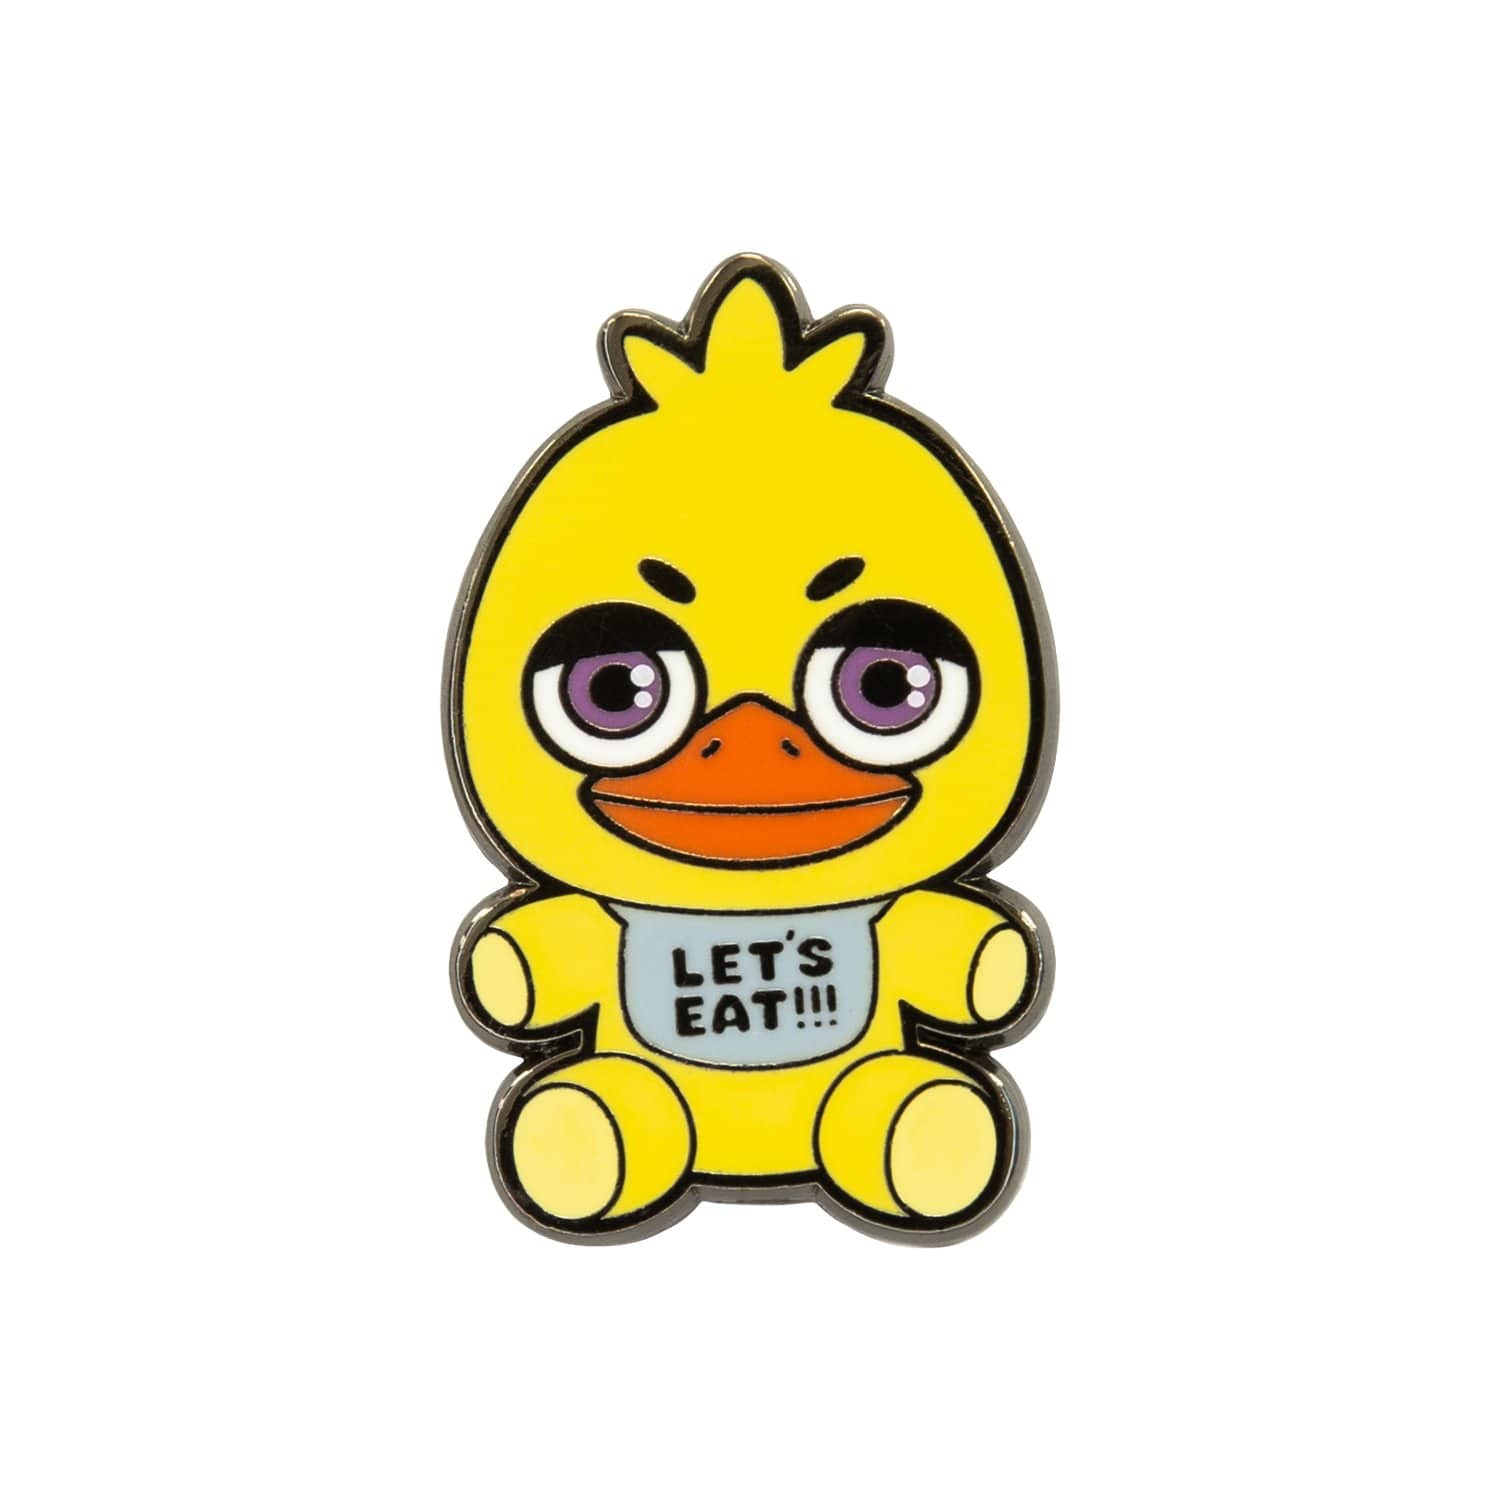 fnaf withered chica  Pin for Sale by artroselia